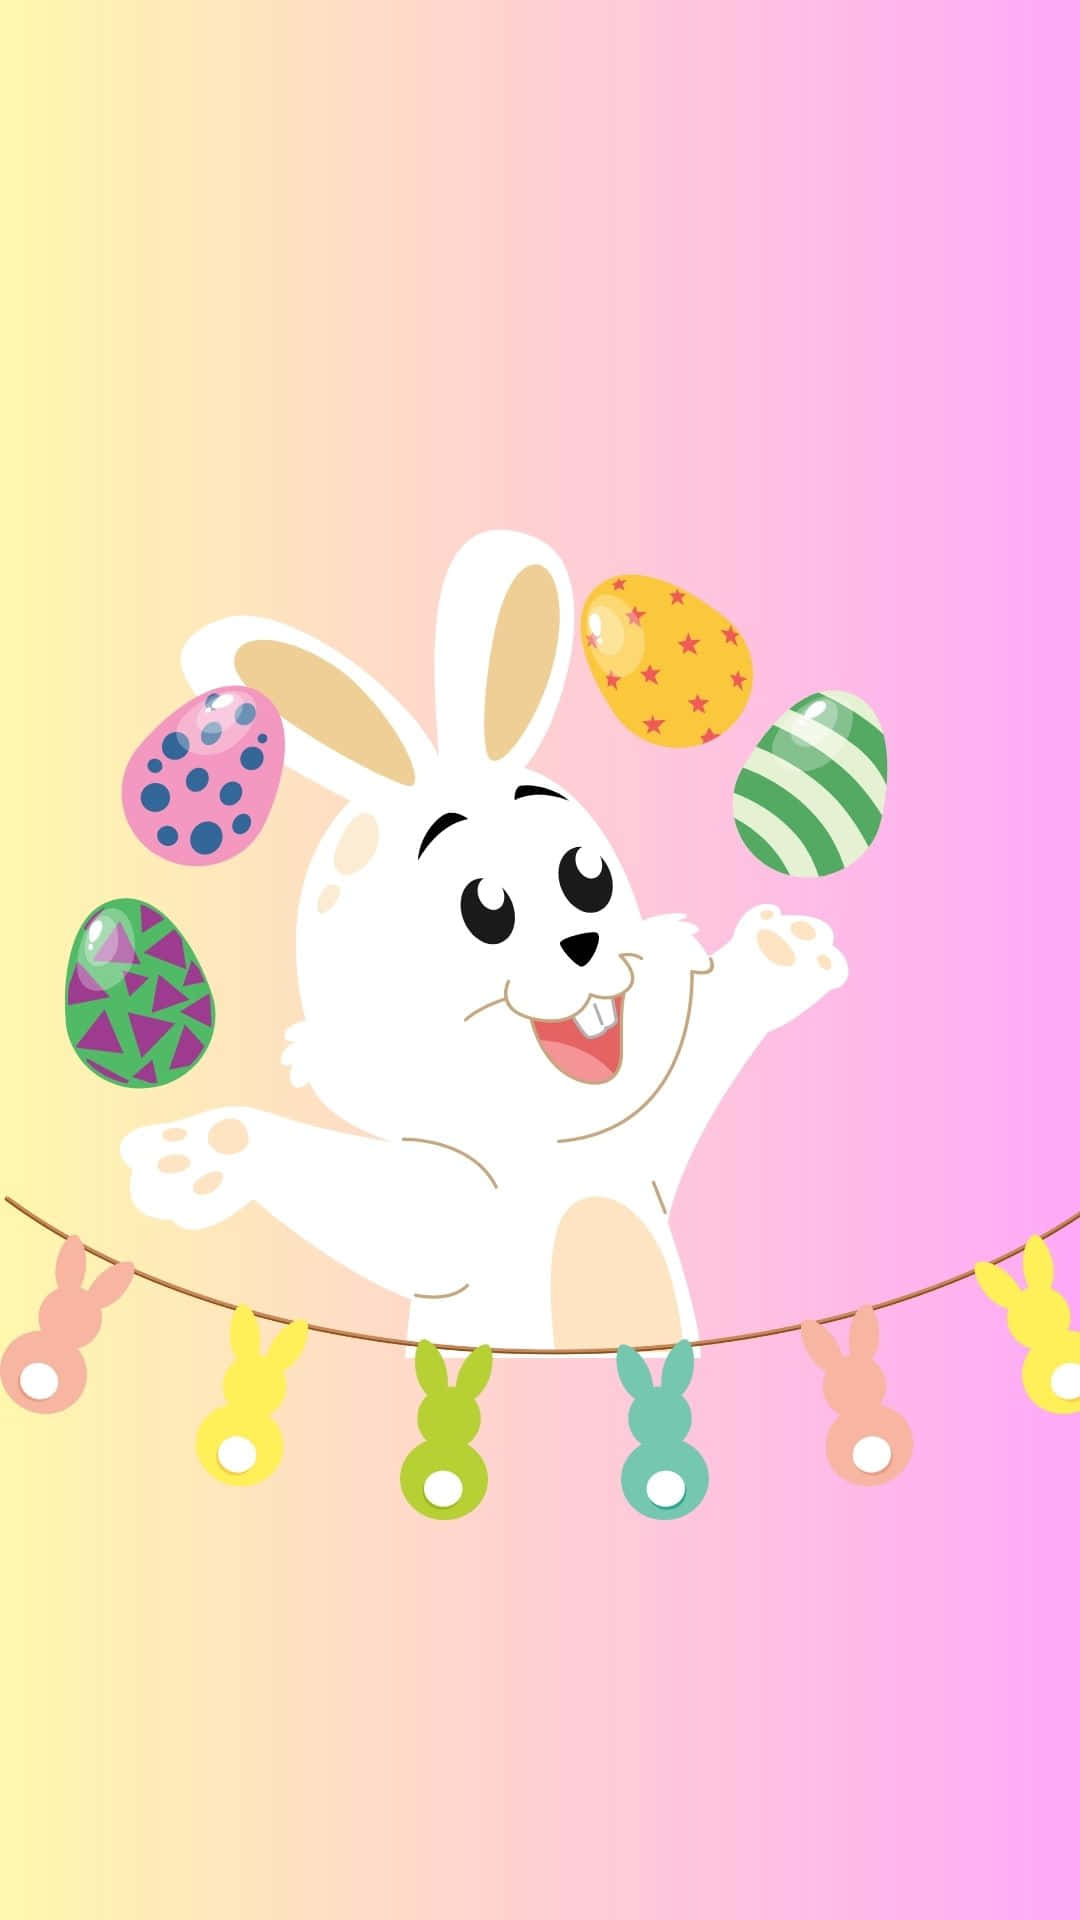 A festive Easter Bunny decorating eggs to celebrate the holiday. Wallpaper